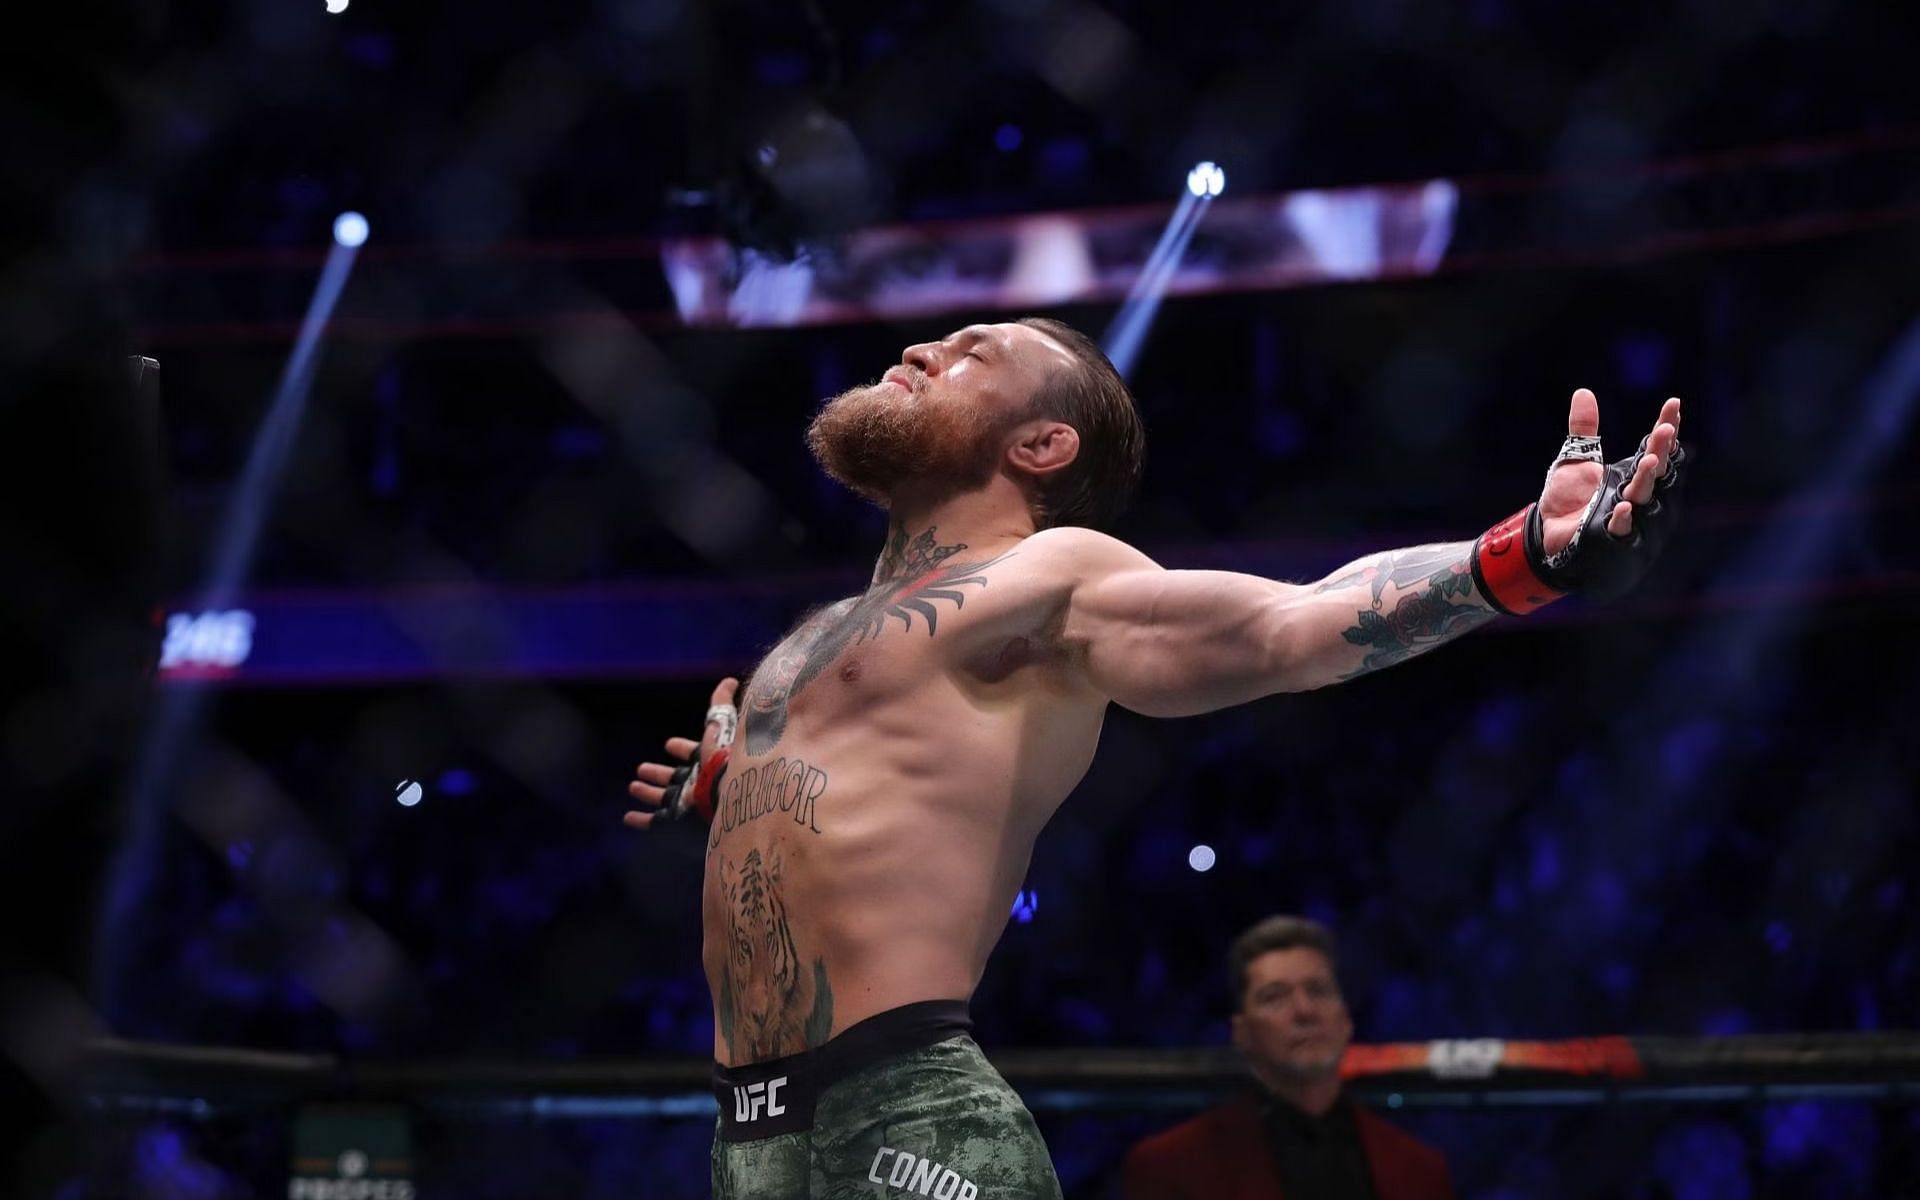 UFC lightweight and former two-division UFC champion Conor McGregor